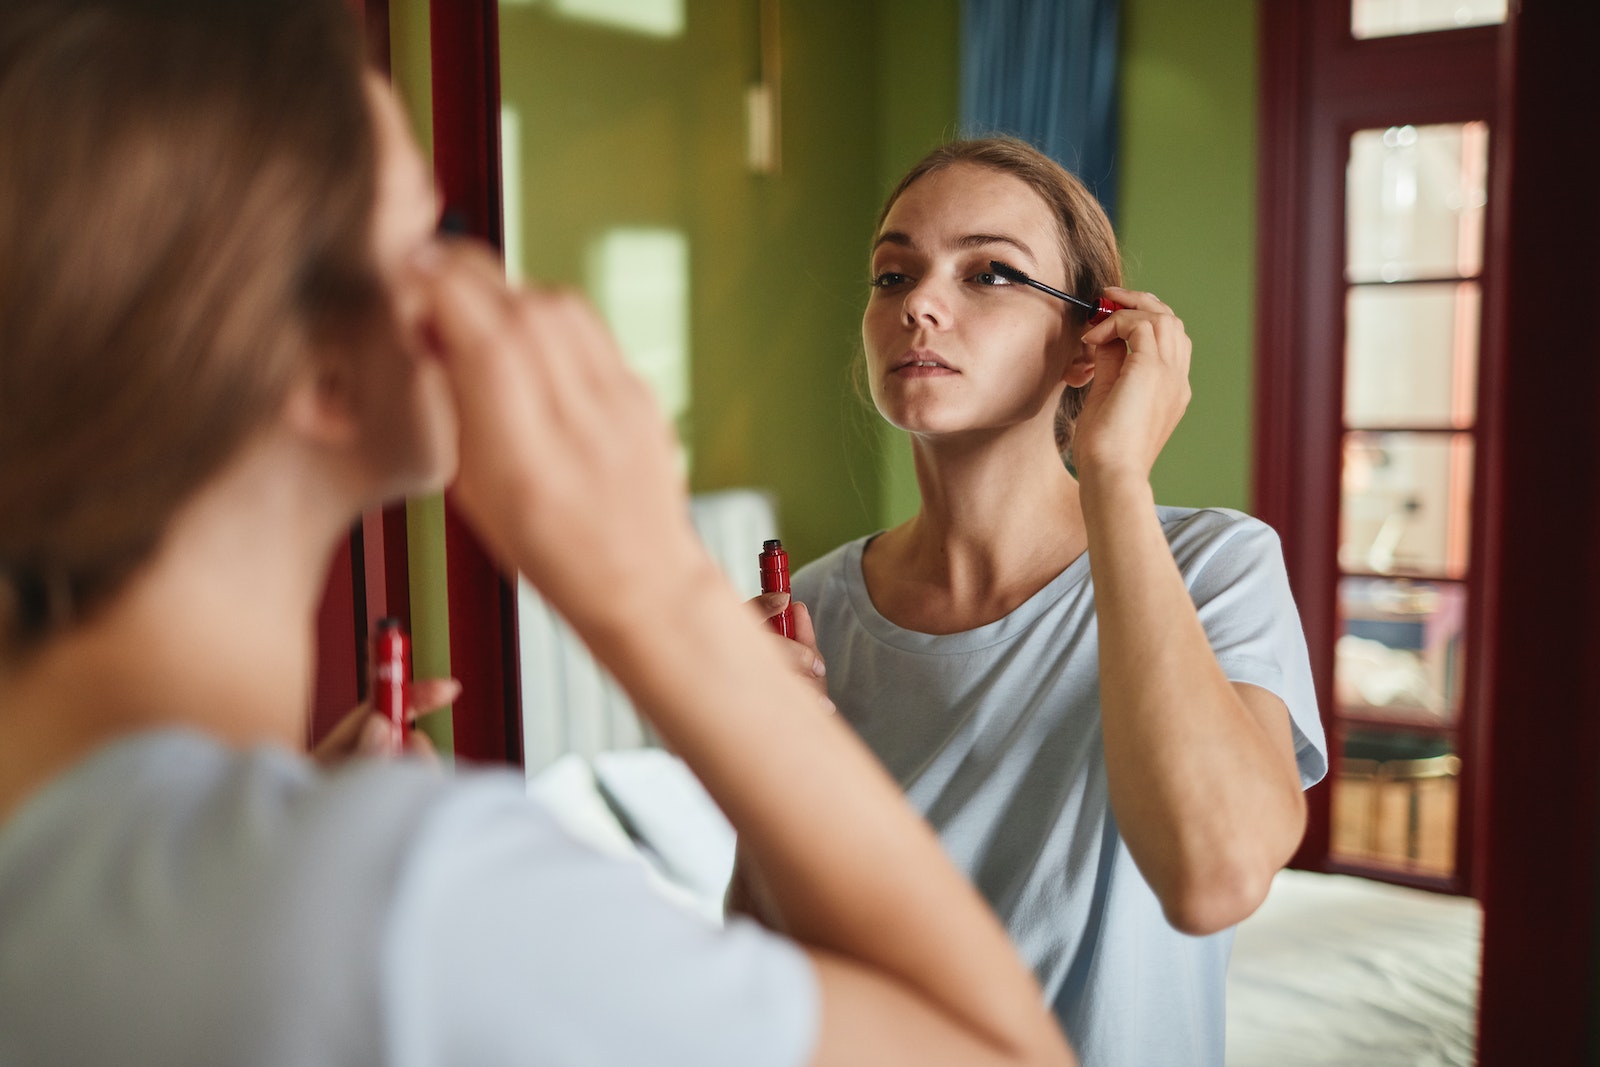 Woman Looking at a Mirror and Putting Make Up